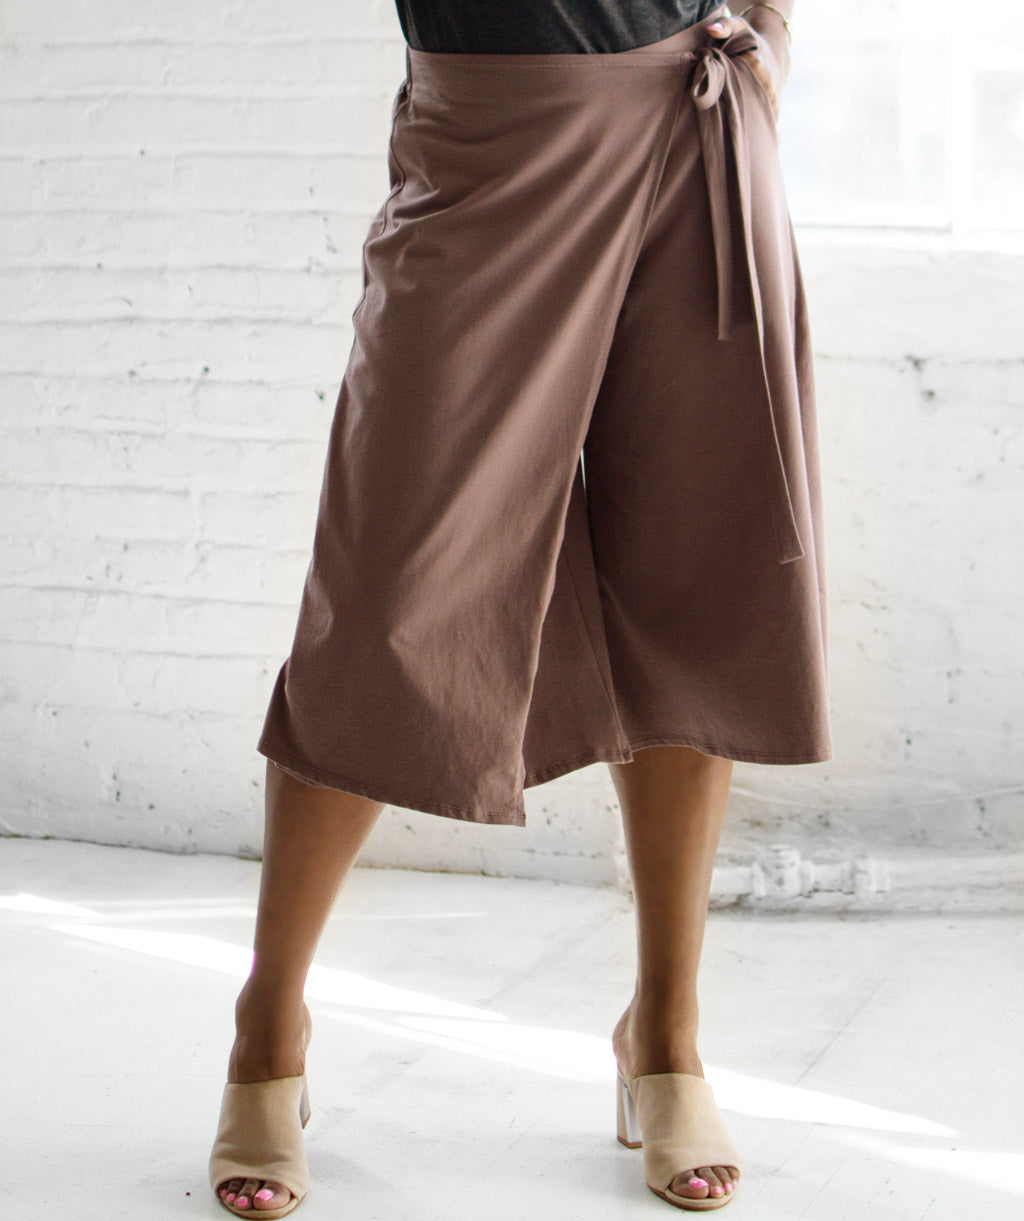 EDITH wrap pants in Deep Taupe